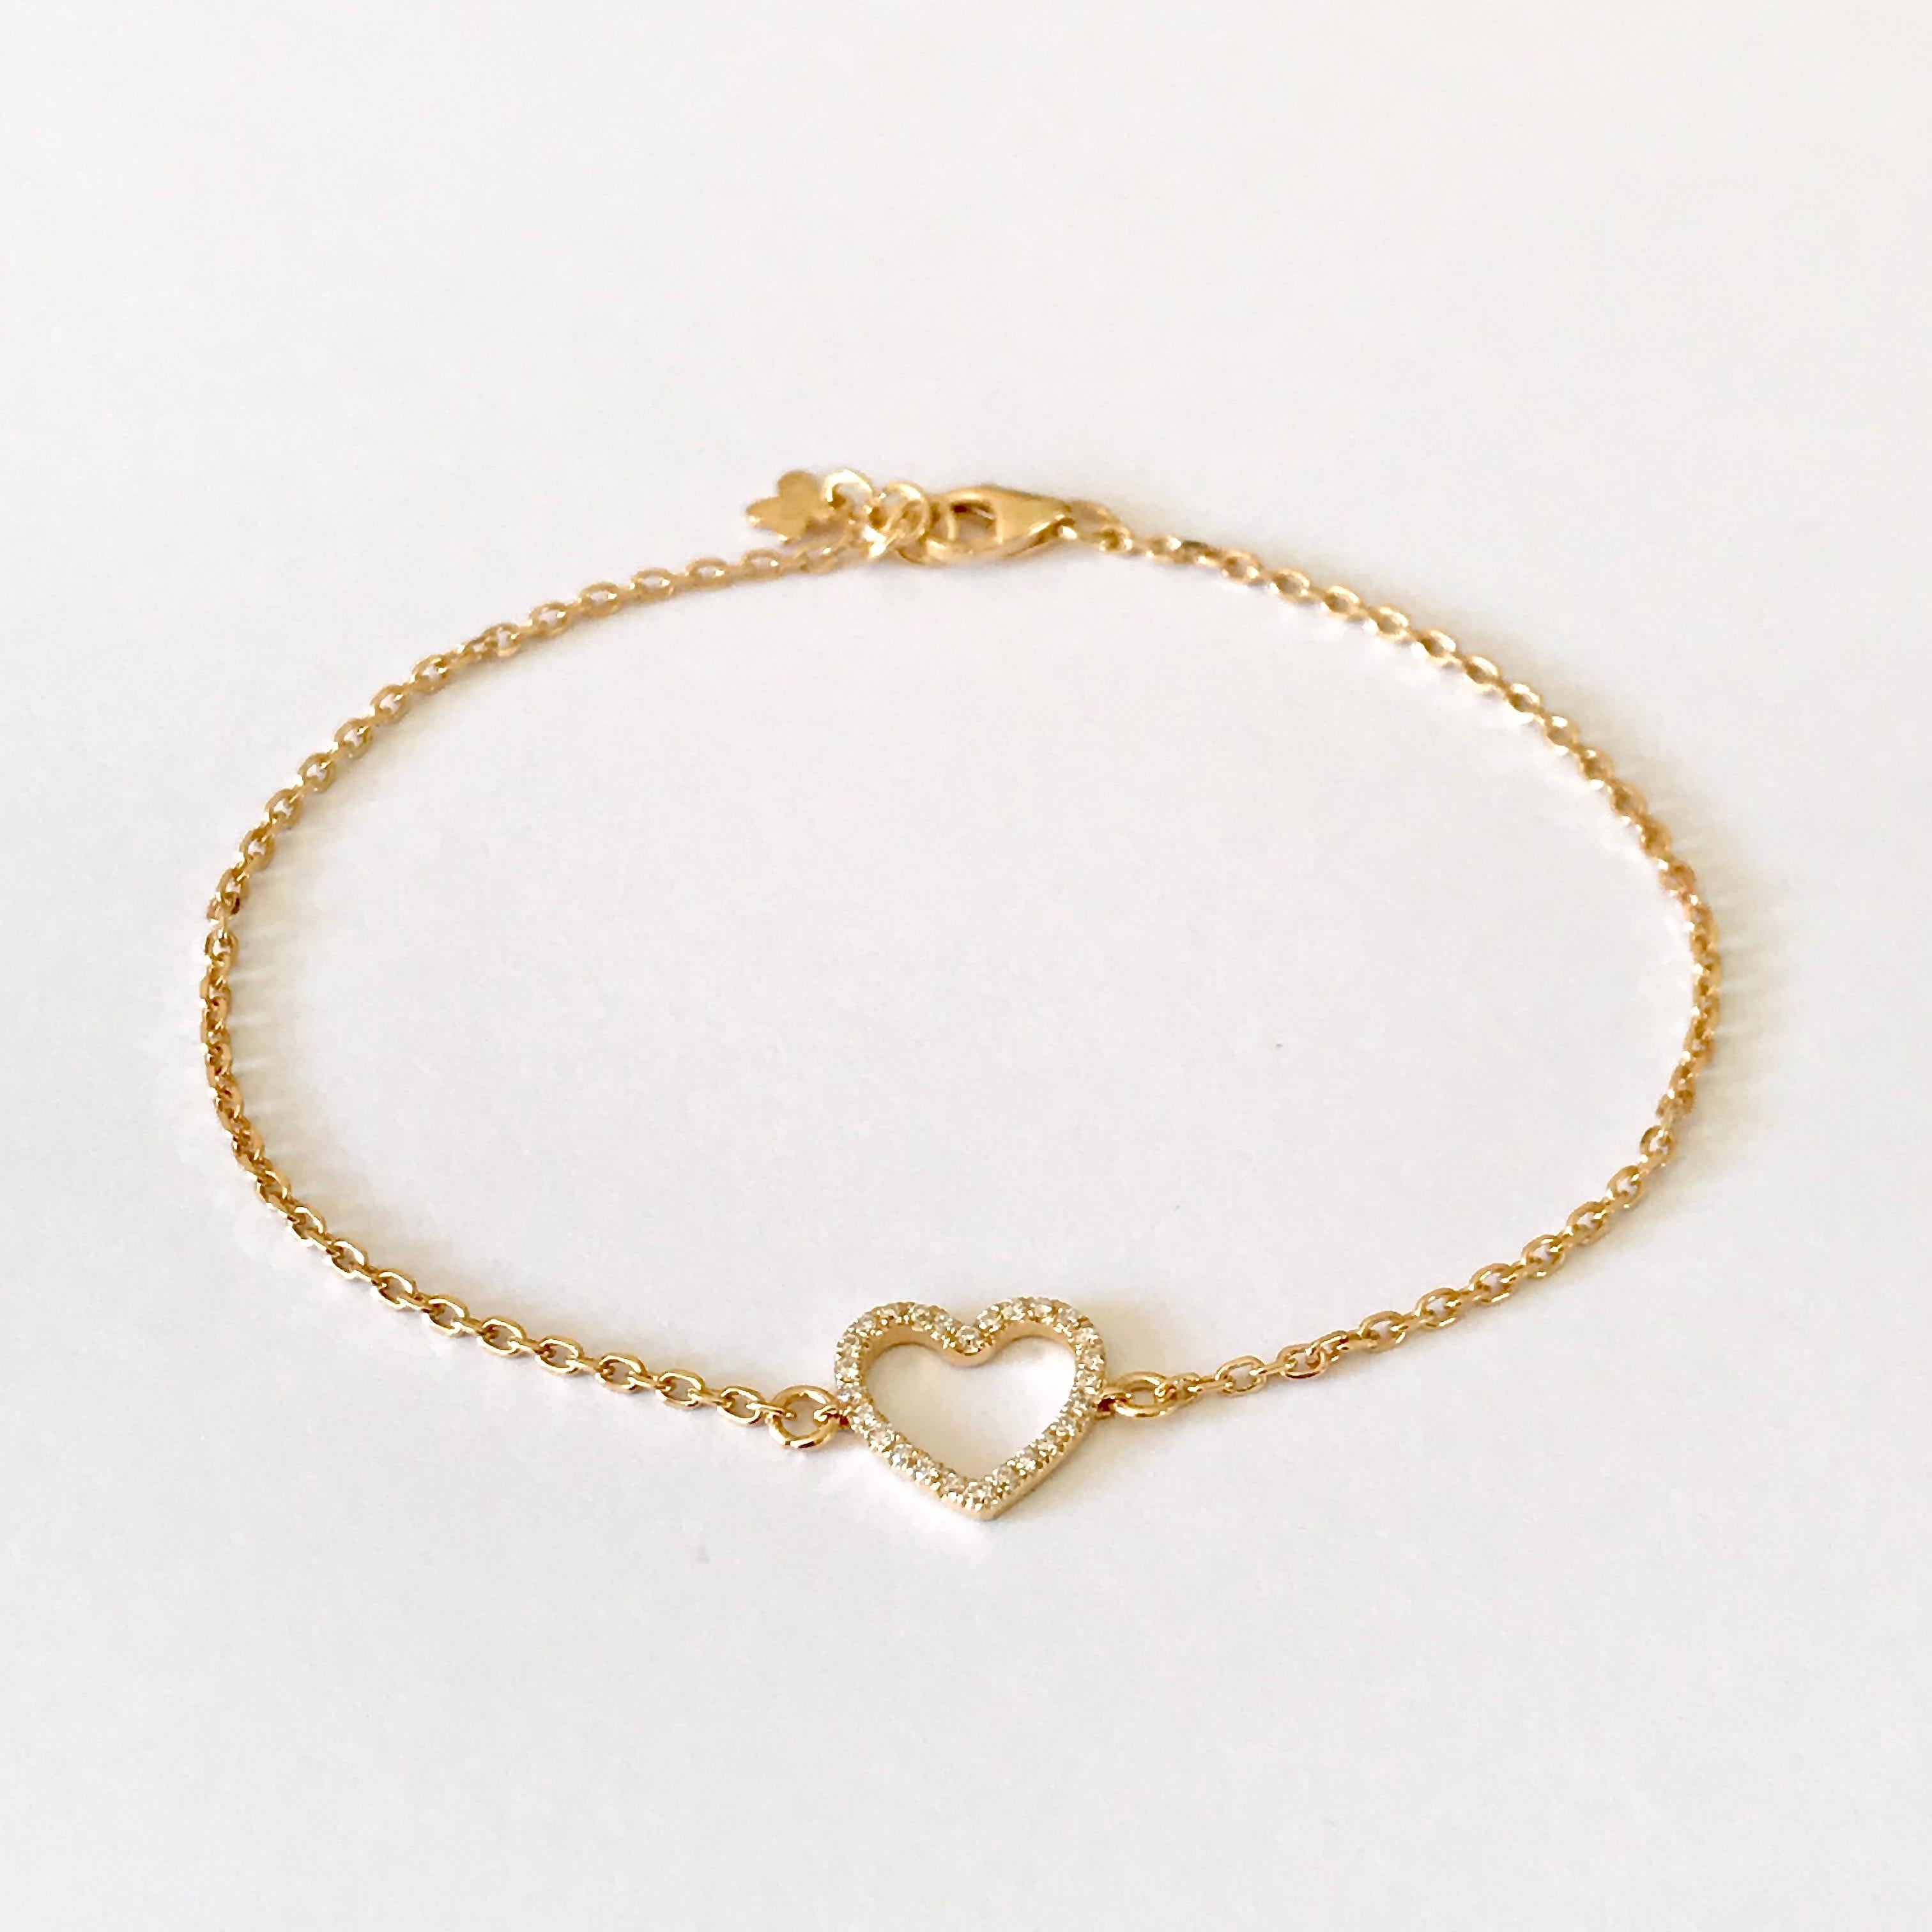 This heart bracelet is made of solid 18Karat gold and is set with high-quality white diamonds.
Length: 18.50 cm ( adjustable different lengths ) 
Total Diamond Carat Weight: 0.11Ct  (26 ) 
Heart’s Width: 1.00 cm
Hallmark: London Goldsmith's Company